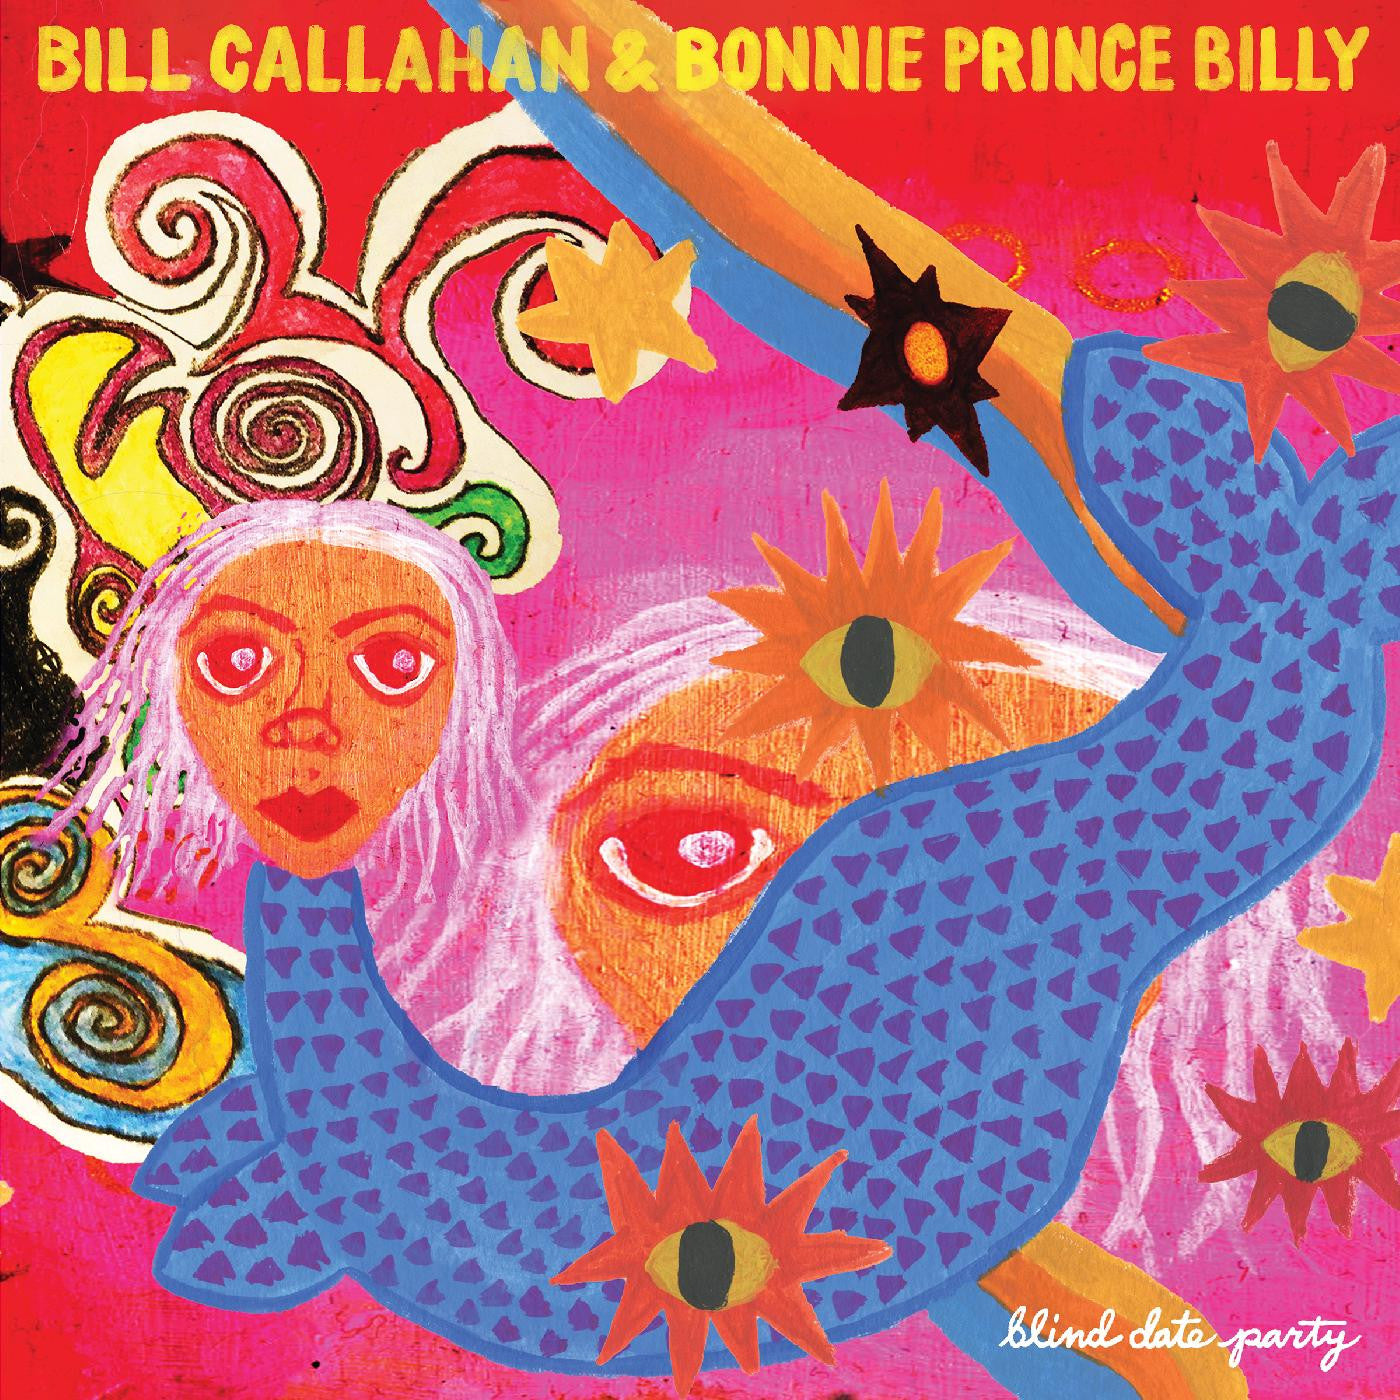 Callahan, Bill & Bonnie 'Prince' Billy - Blind Date Party (Cassette)